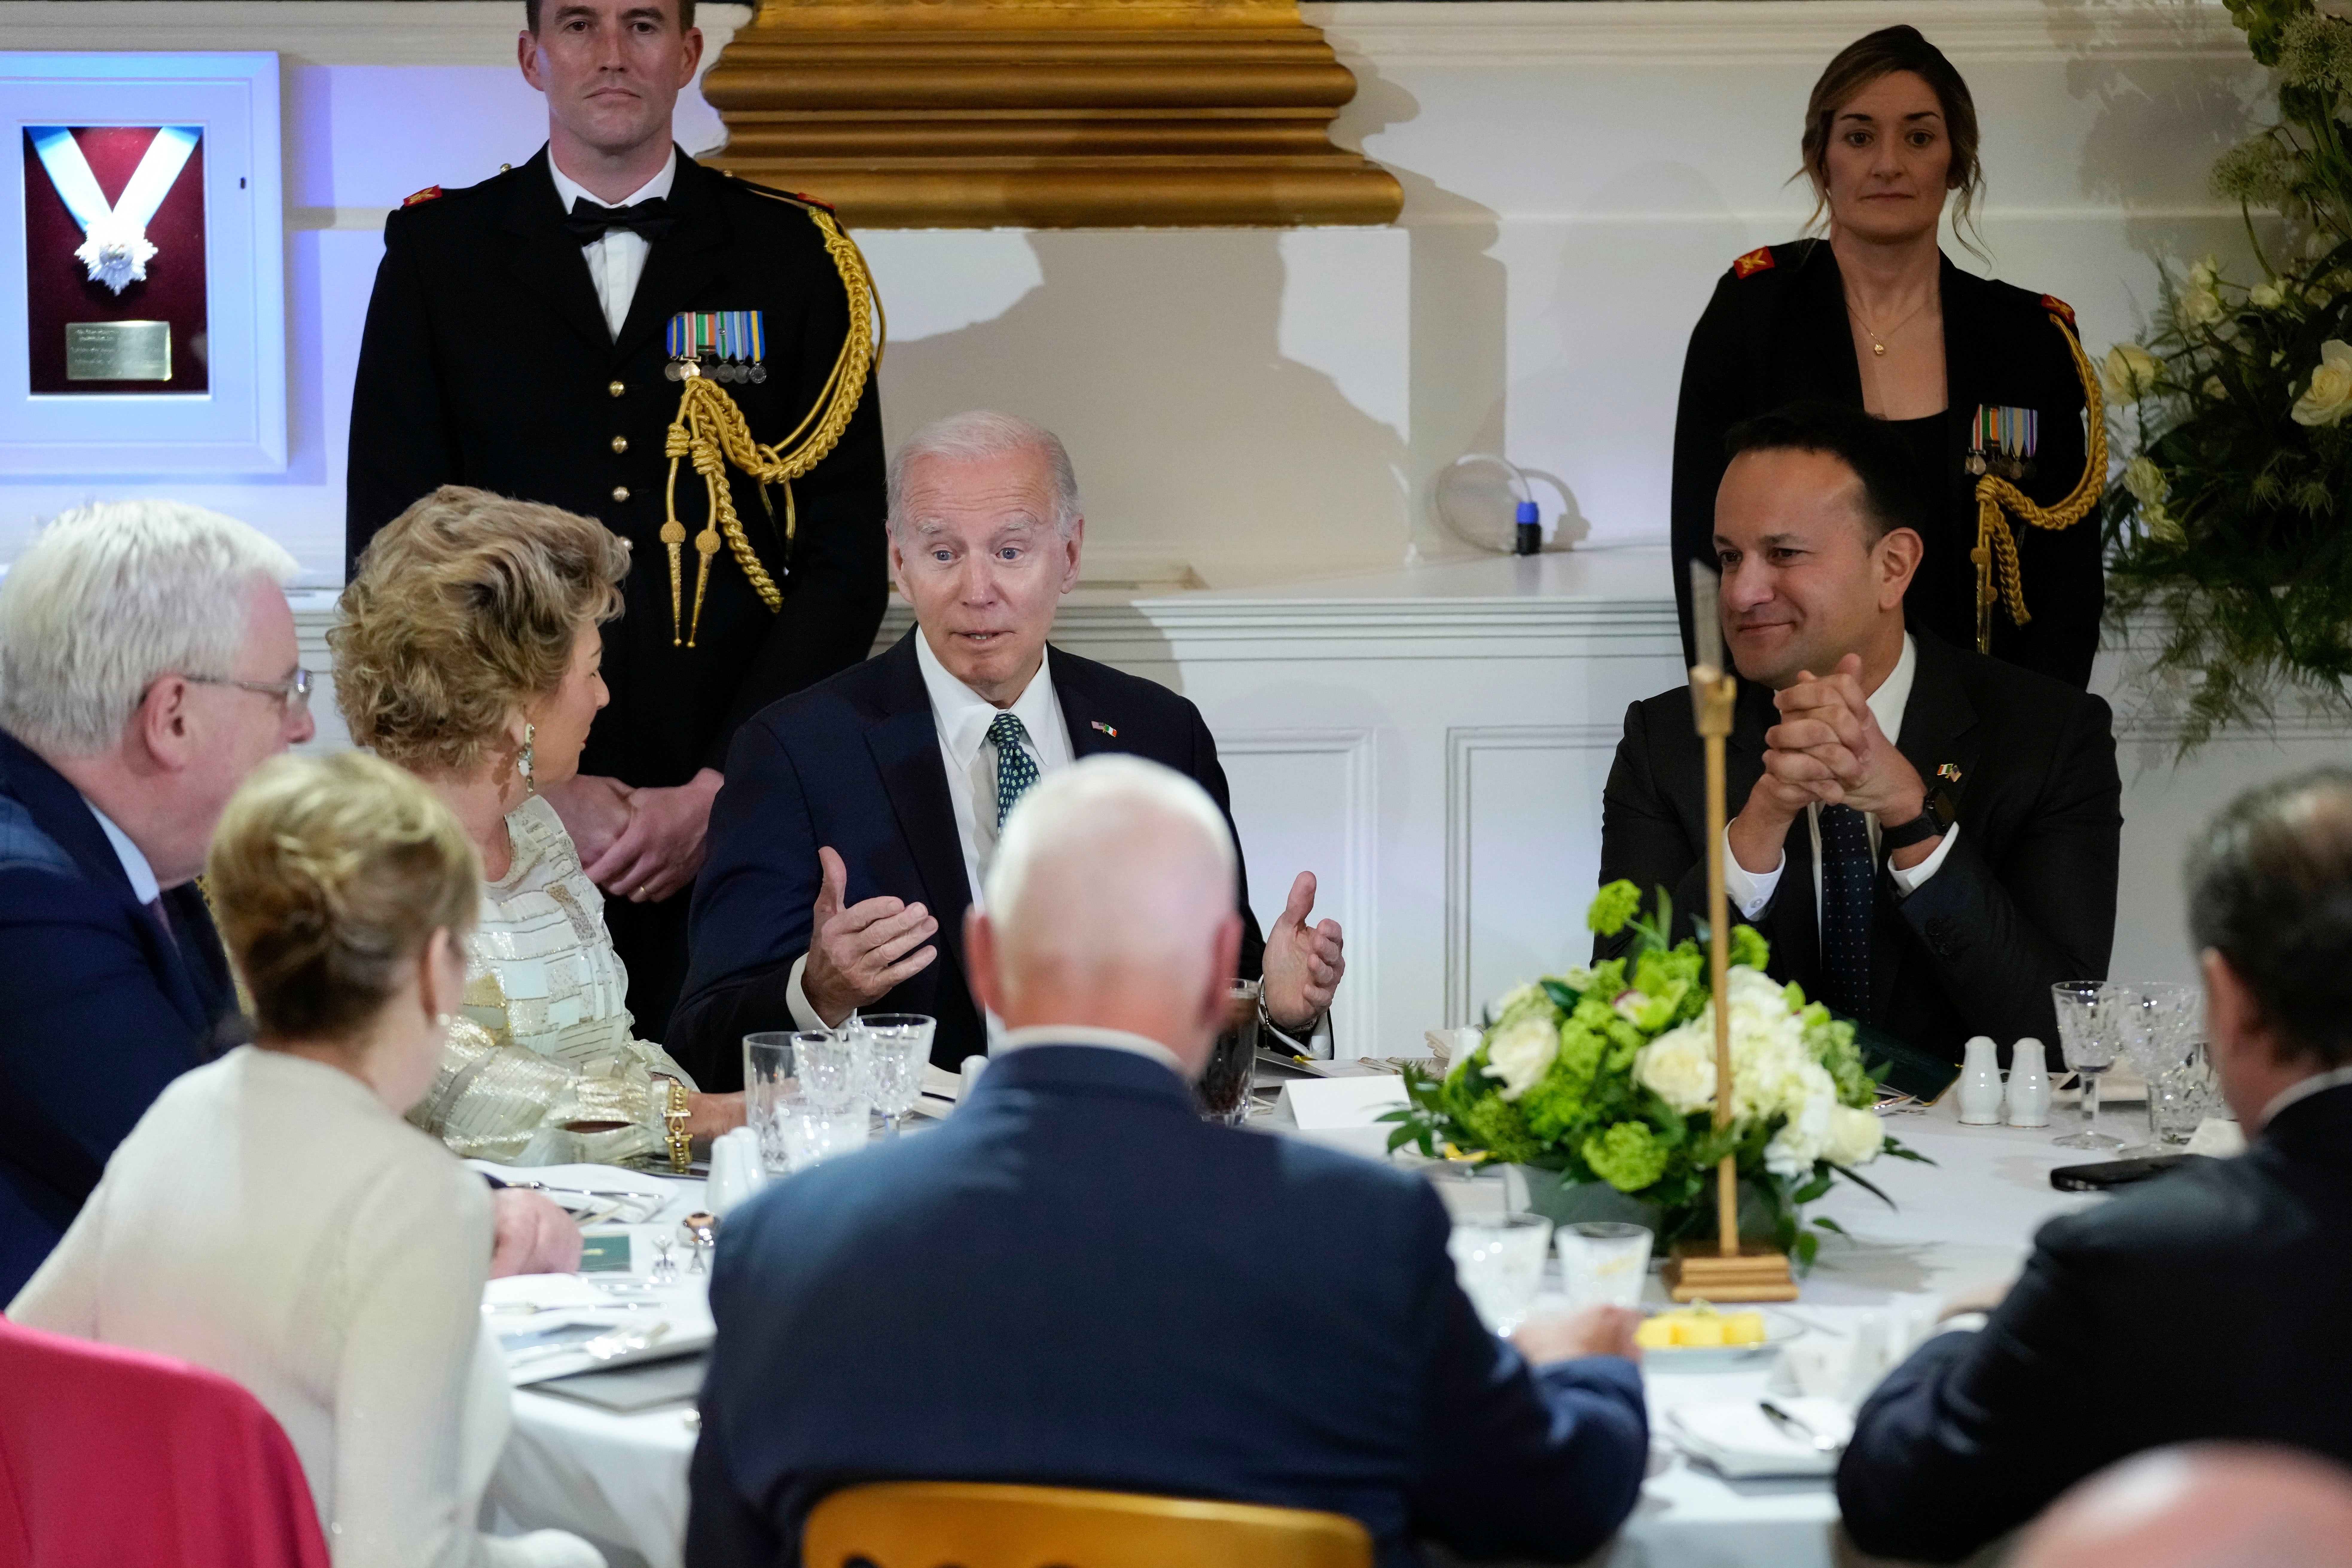 <p>Biden sits next to Varadkar (to his right) at the Dublin Castle dinner</p>